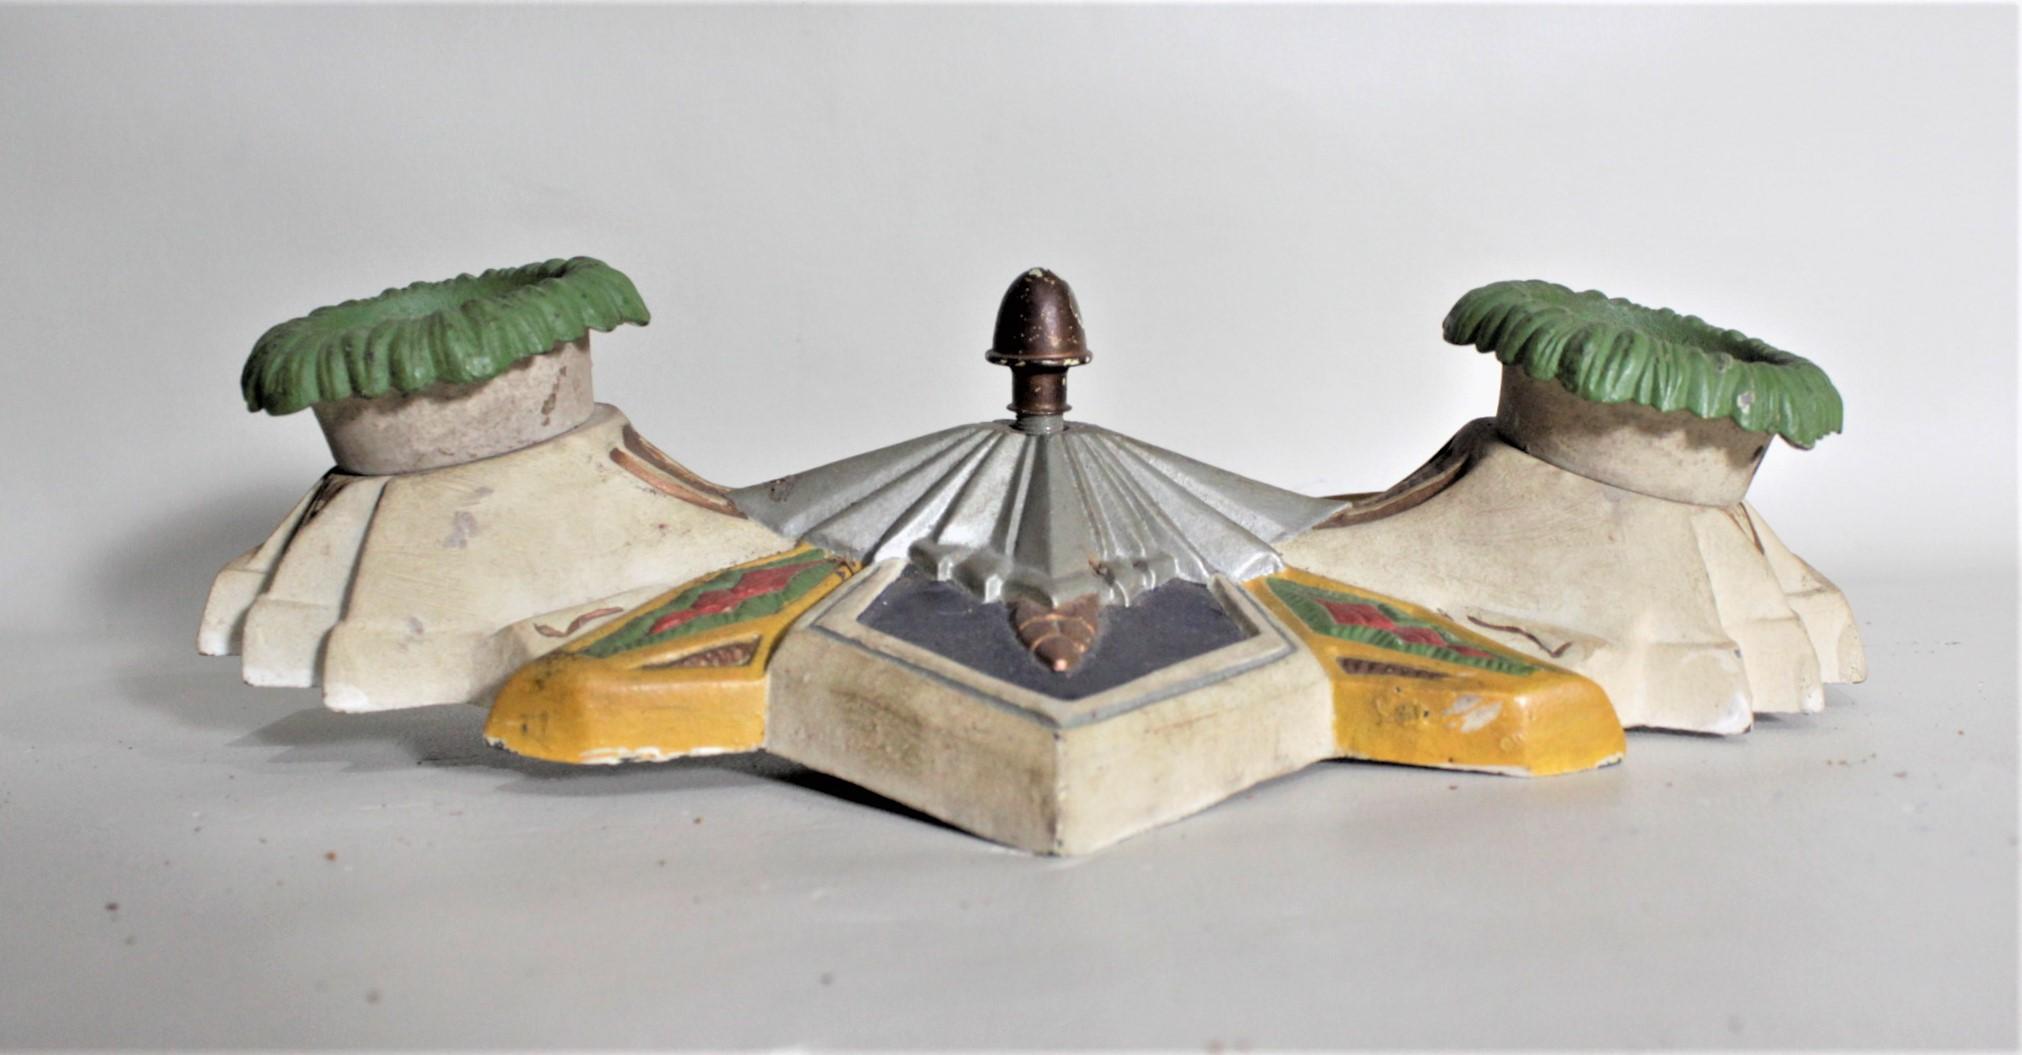 This cast metal flushmount ceiling light fixture is unsigned but presumed to have been made in the United States in circa 1935 in the period Art Deco style. The casting is quite detailed, showing several levels of the stepped Deco design with linear